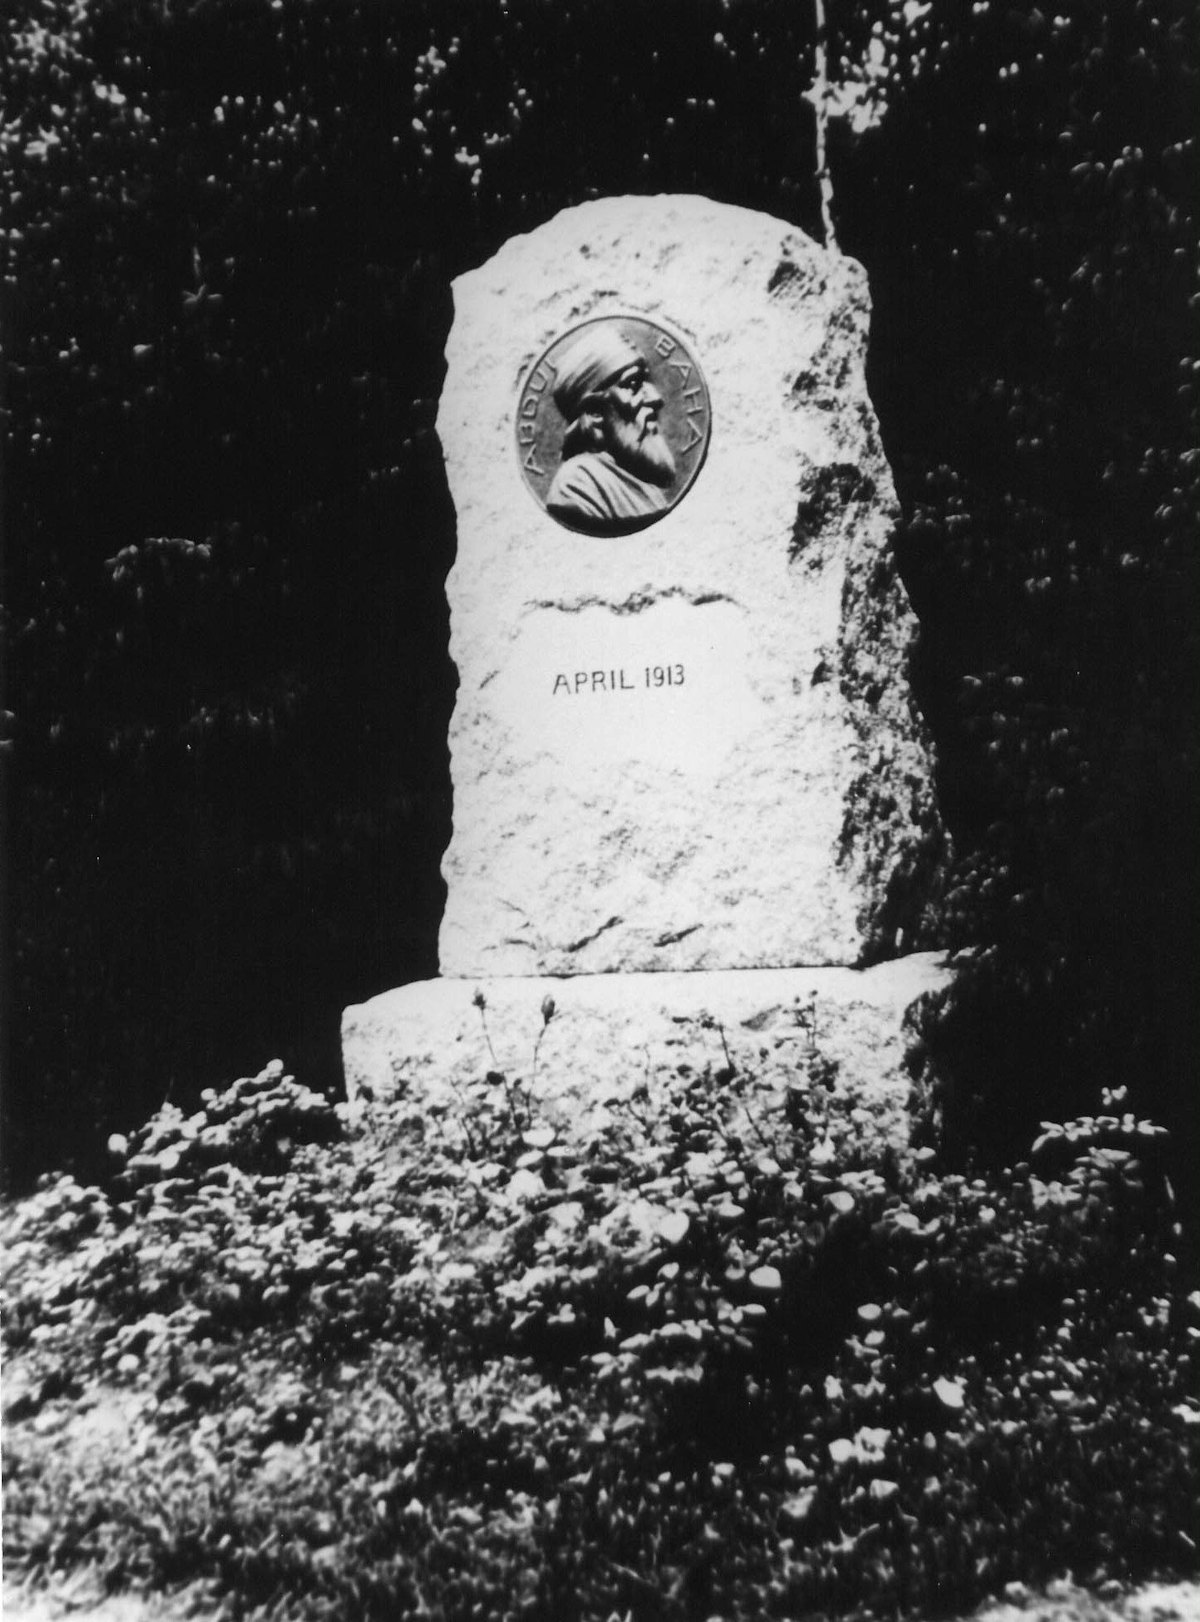 The original monument in Bad Mergentheim, pictured here, was removed during the Nazi regime.